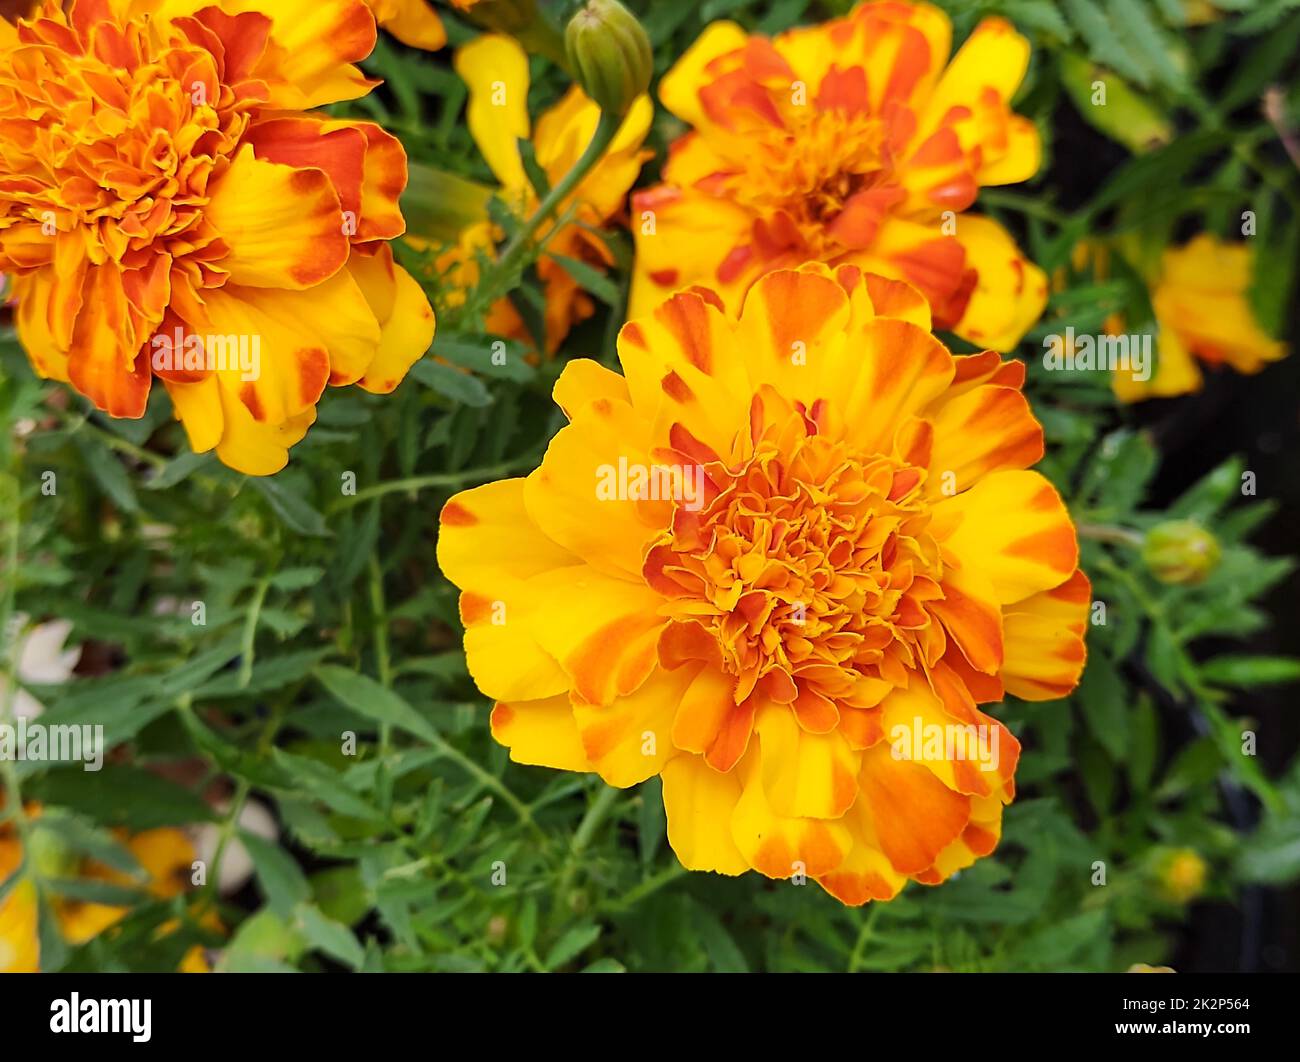 Flowers and leaves of the yellow orange tagete (Marigold) or yellow carnation flower. Stock Photo